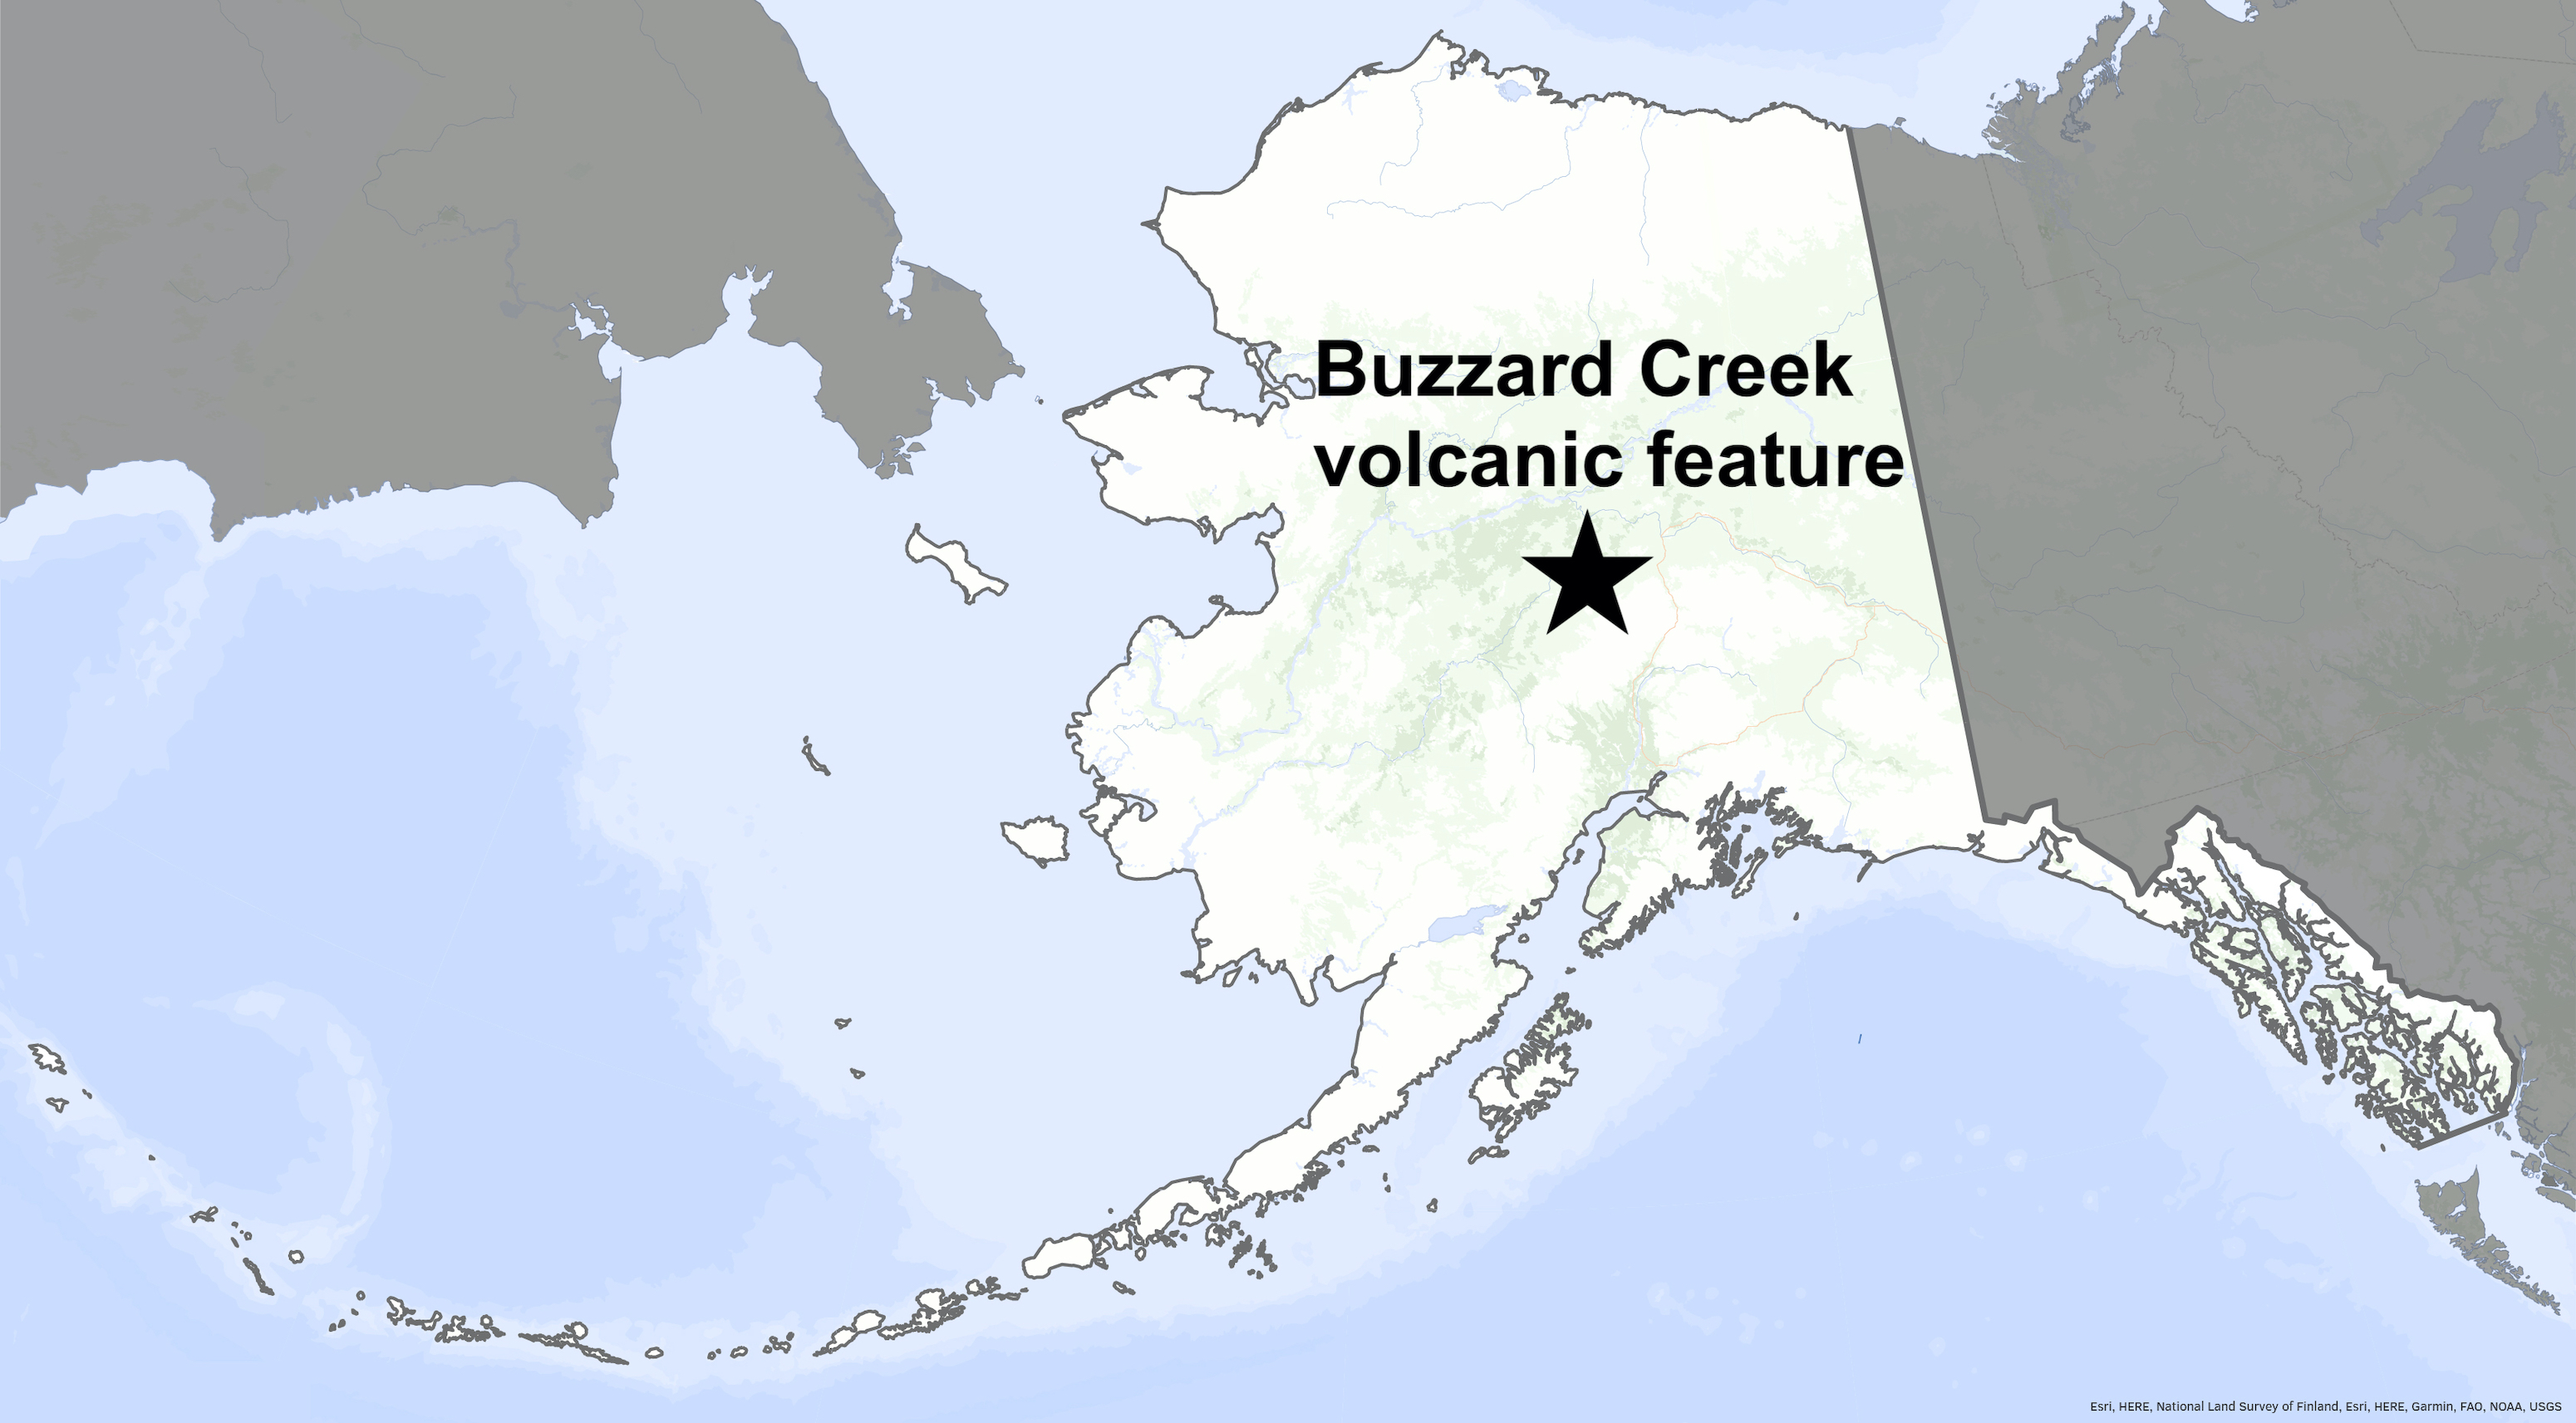 A star on a map marks the location of the Buzzard Creek maars in central Alaska.